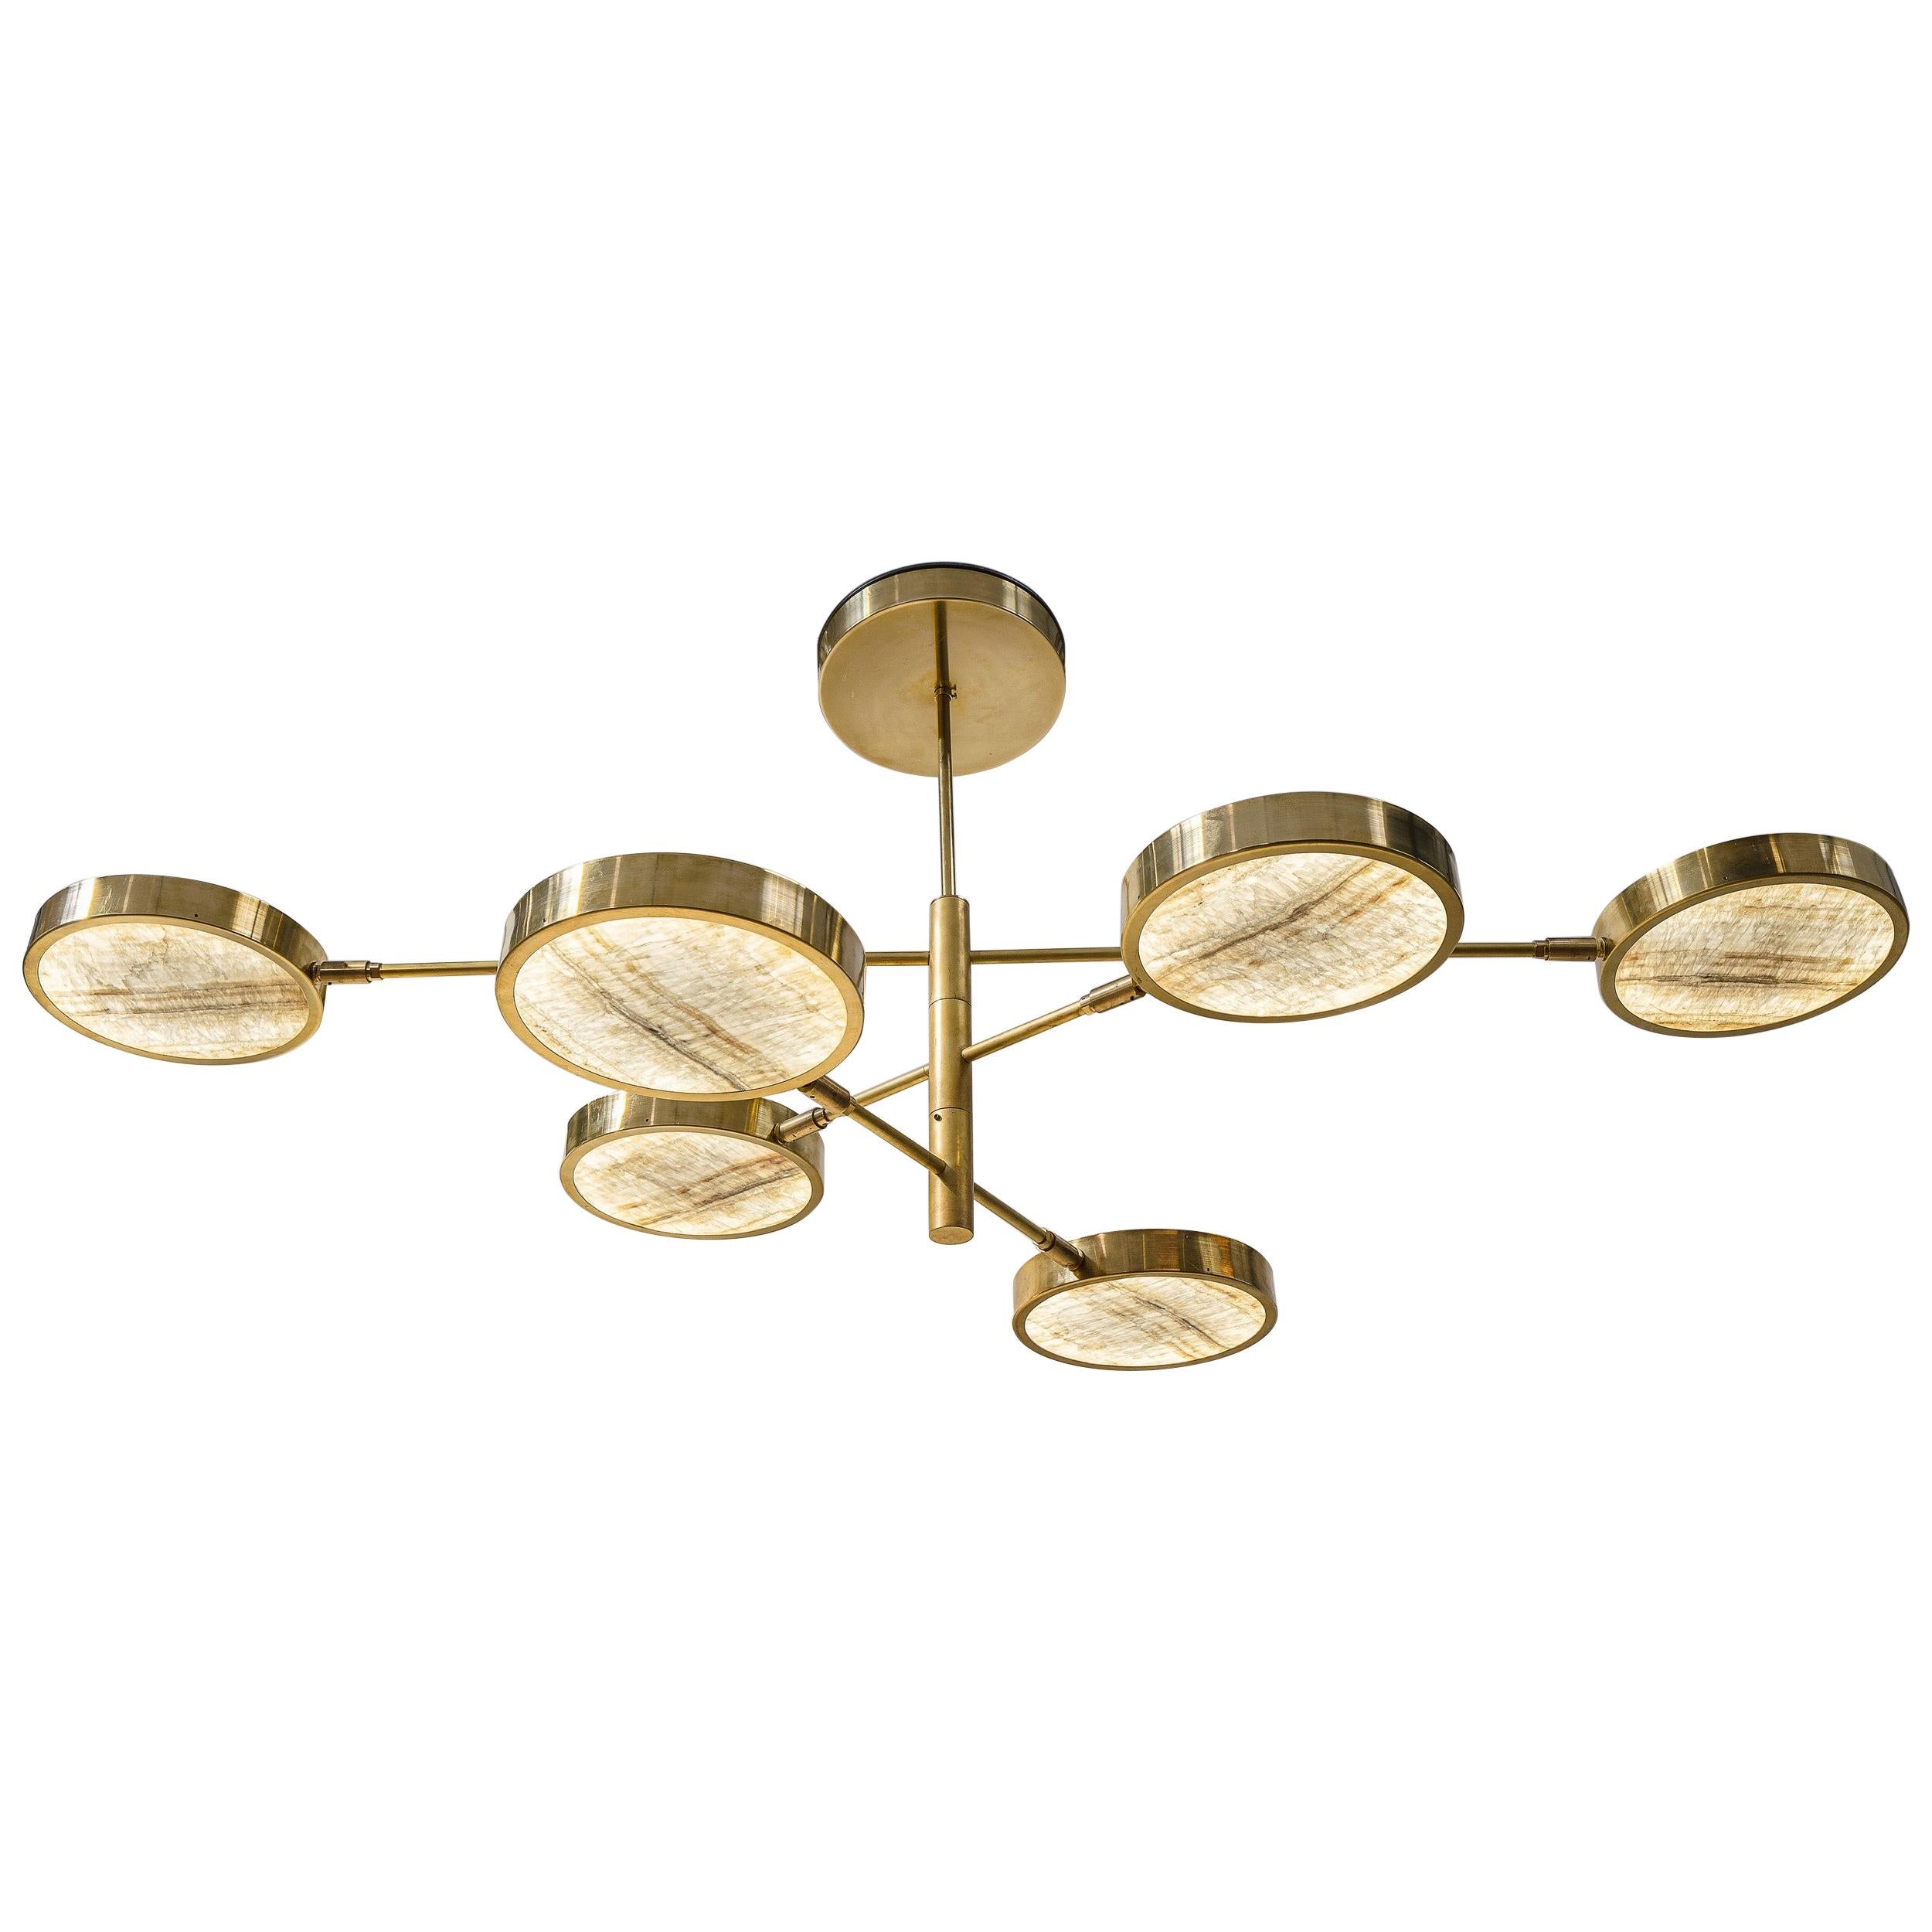 Sistema Solare Chandelier, Piattelli Design, Ivory-toned Onyx and Brass, 6-shade For Sale